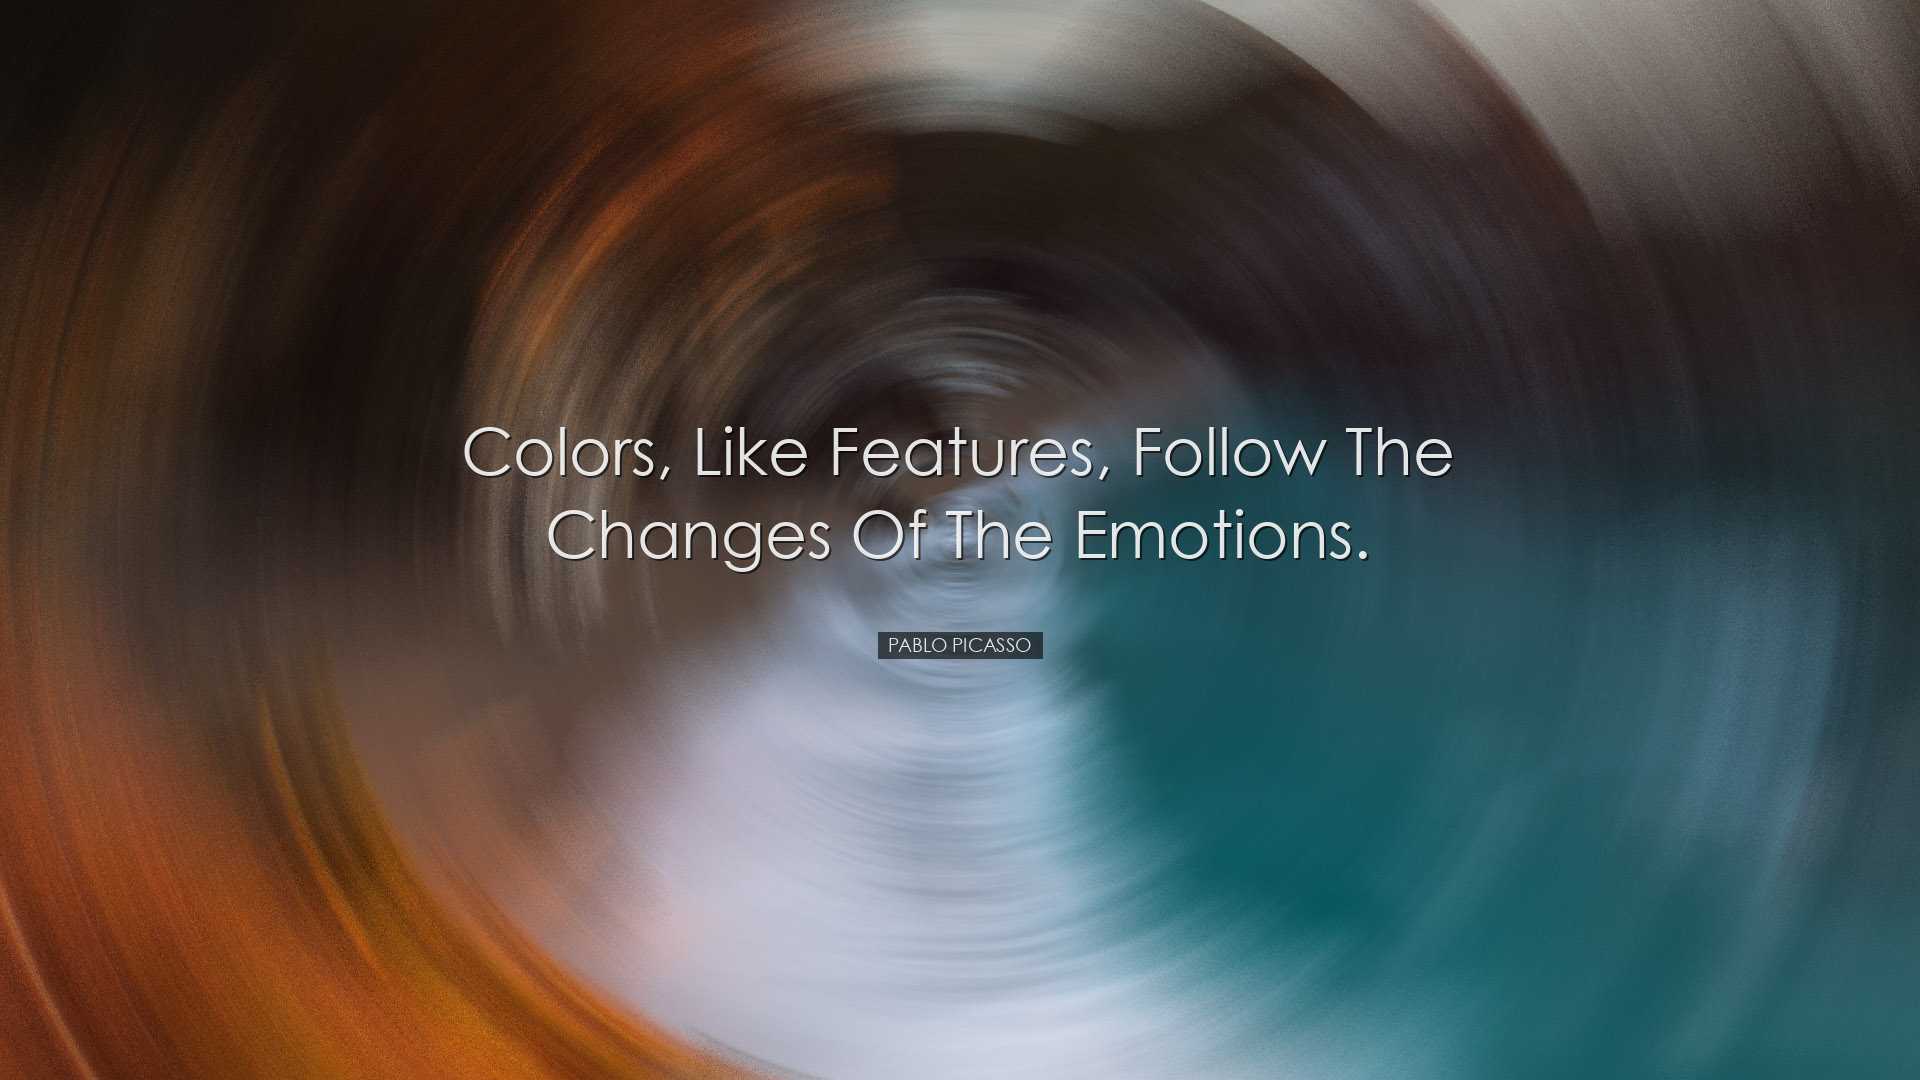 Colors, like features, follow the changes of the emotions. - Pablo